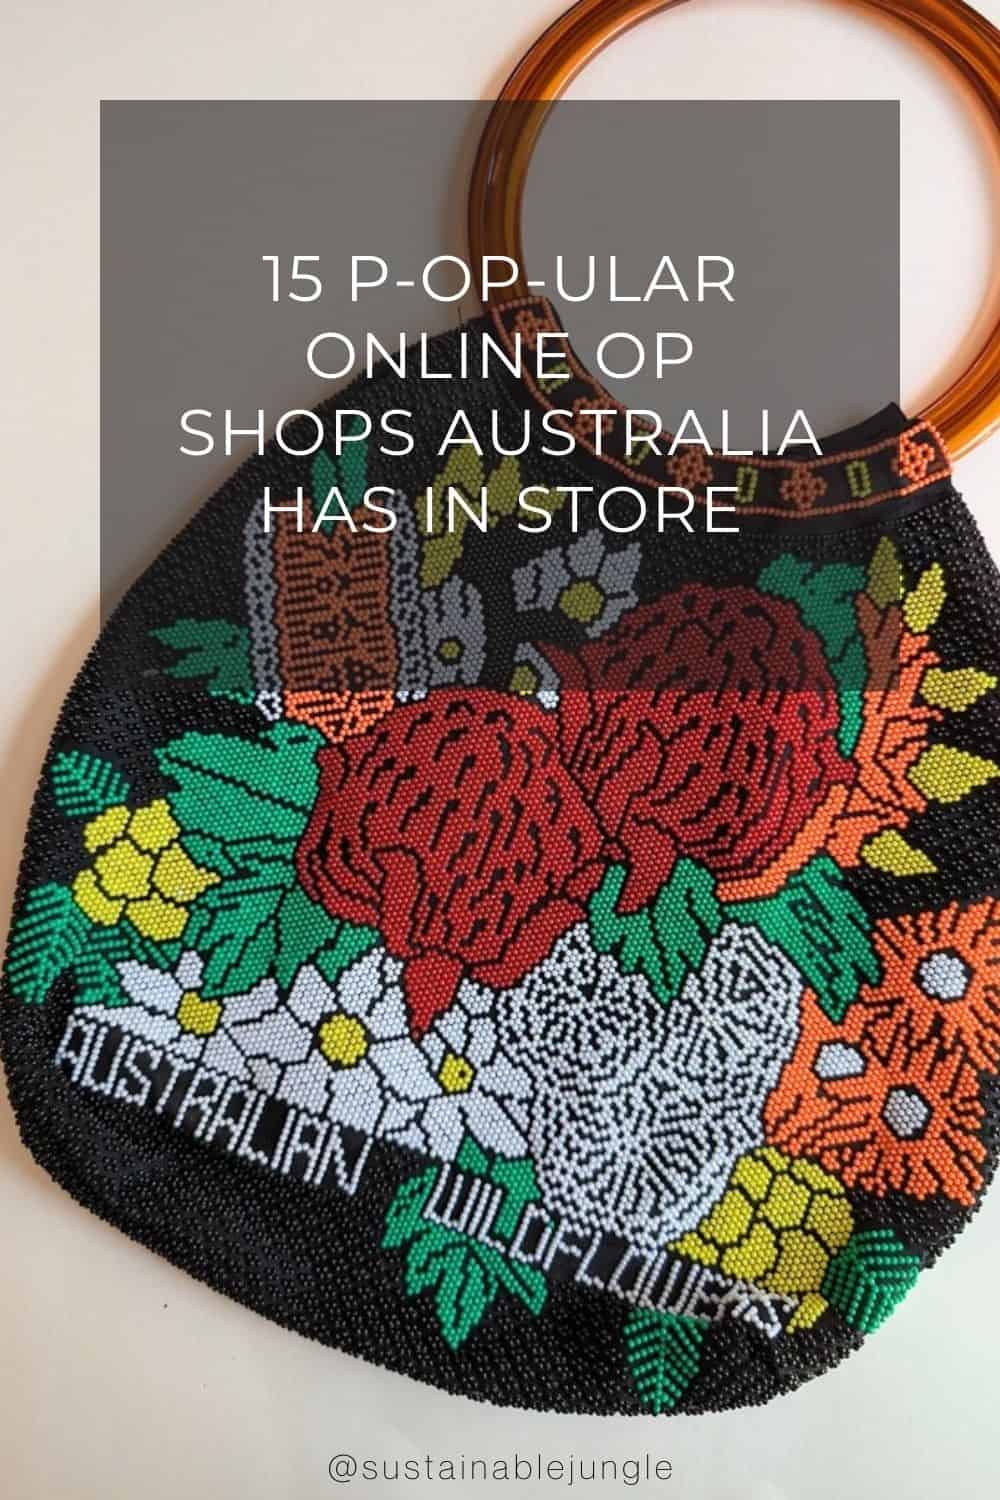 15 P-Op-ular Online Op Shops Australia Has In Store Image by Found Retro Fashion #onlineopshopaustralia #opshoponlineaustralia #opshopsaustralia #bestaustralianopshops #sustainablejungle